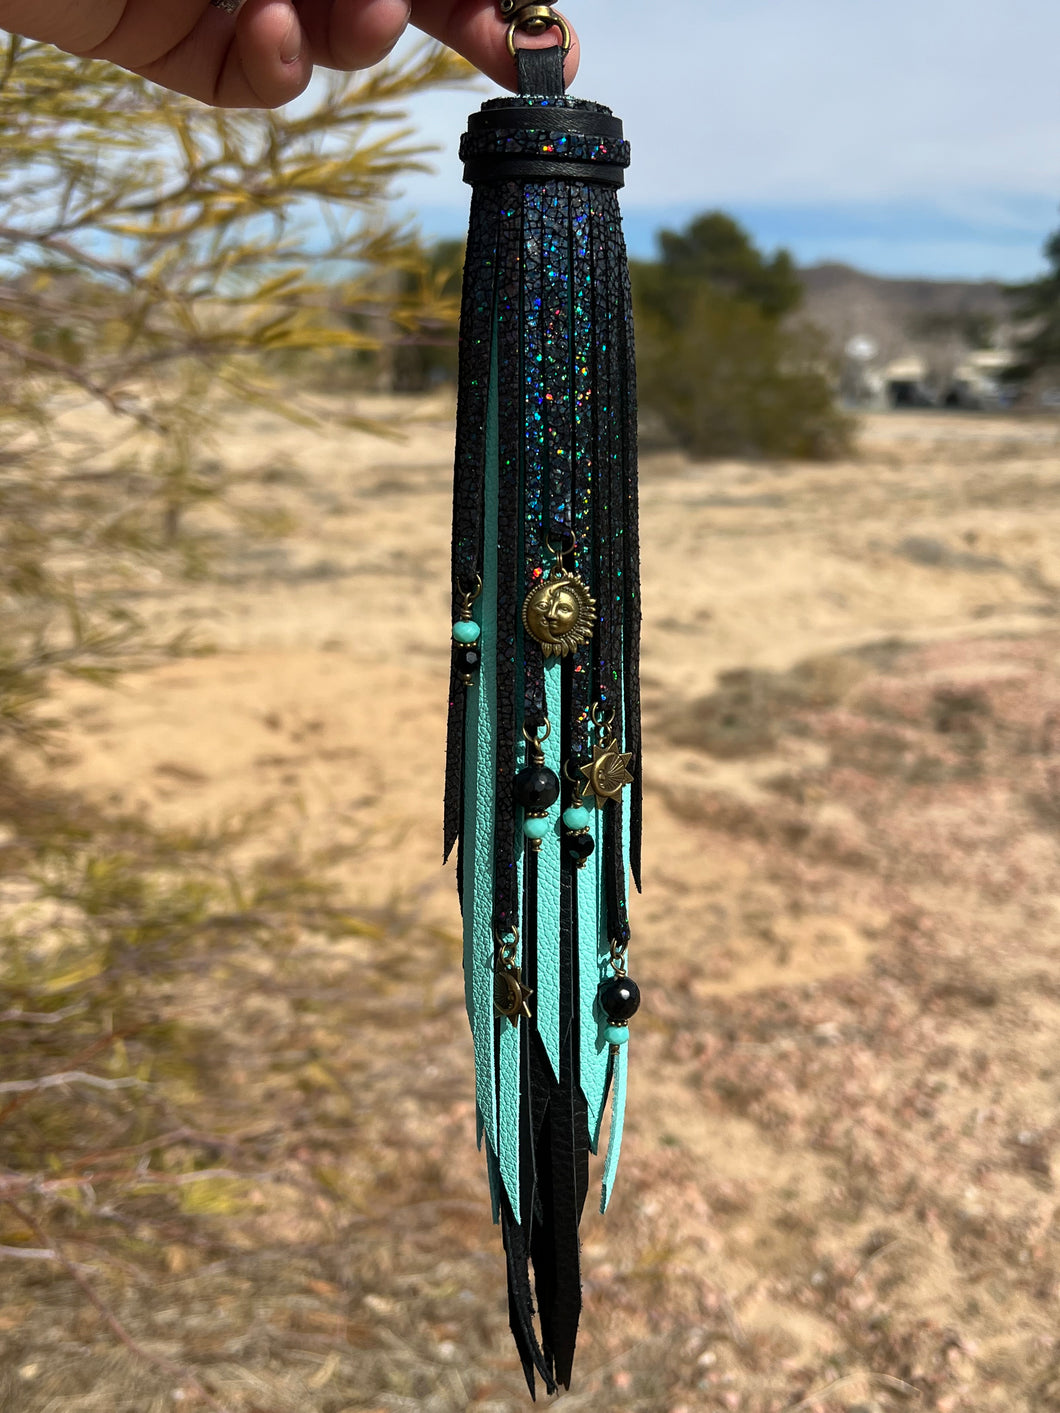 Long Clip Tassel - Black, Robin's Egg Blue and Black Cracked Ice Cowhide Leather with Beaded Charms and Antique Bonze Charms